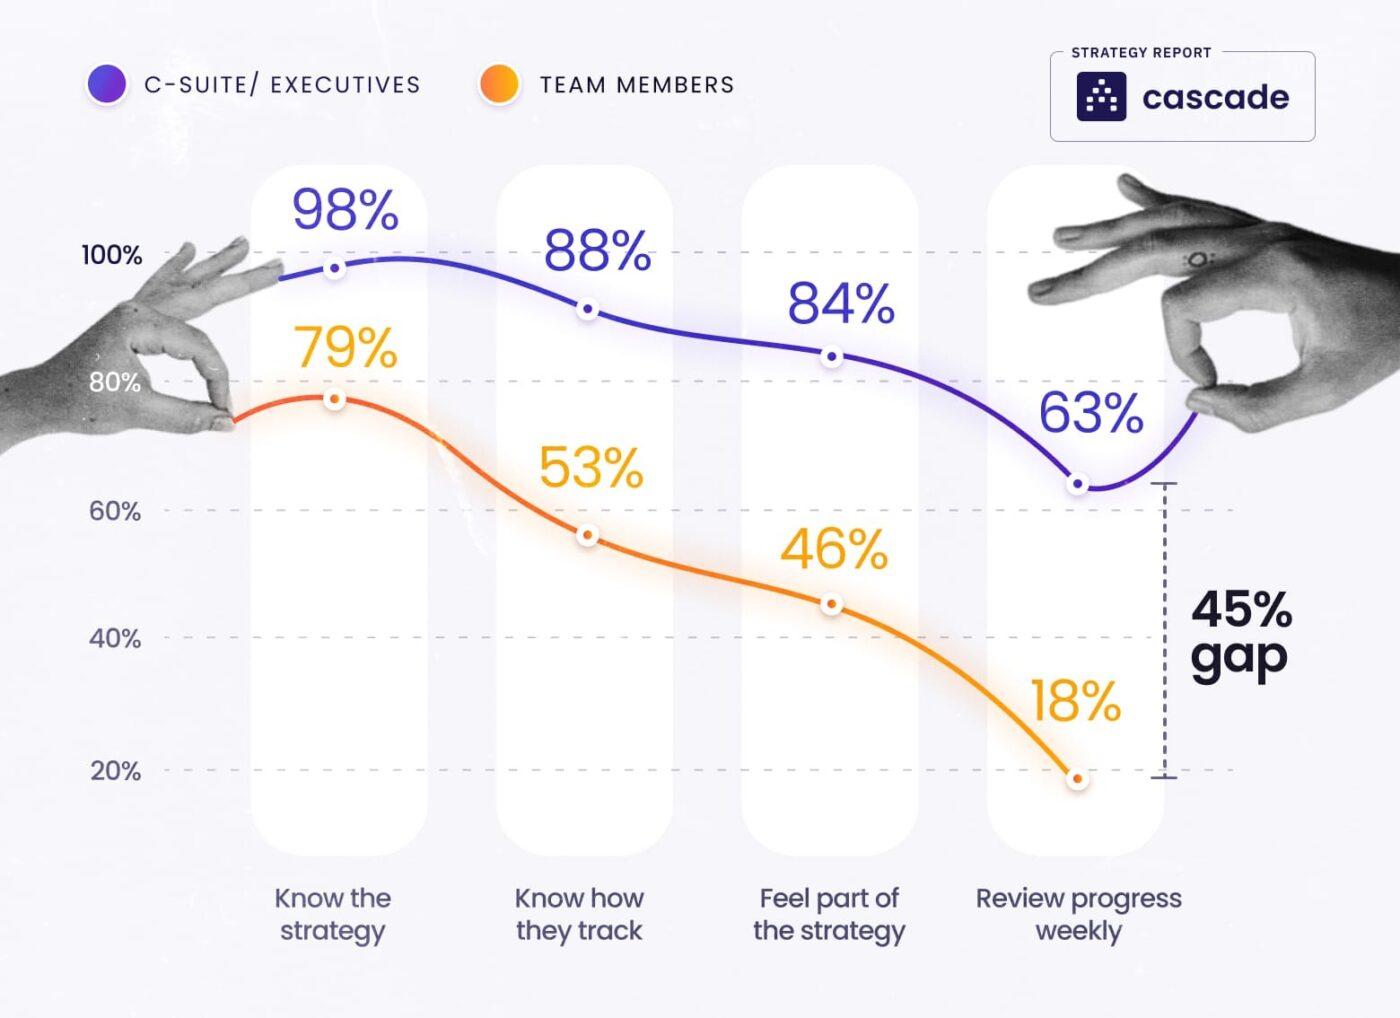 gap analysis between executives and team members by cascade